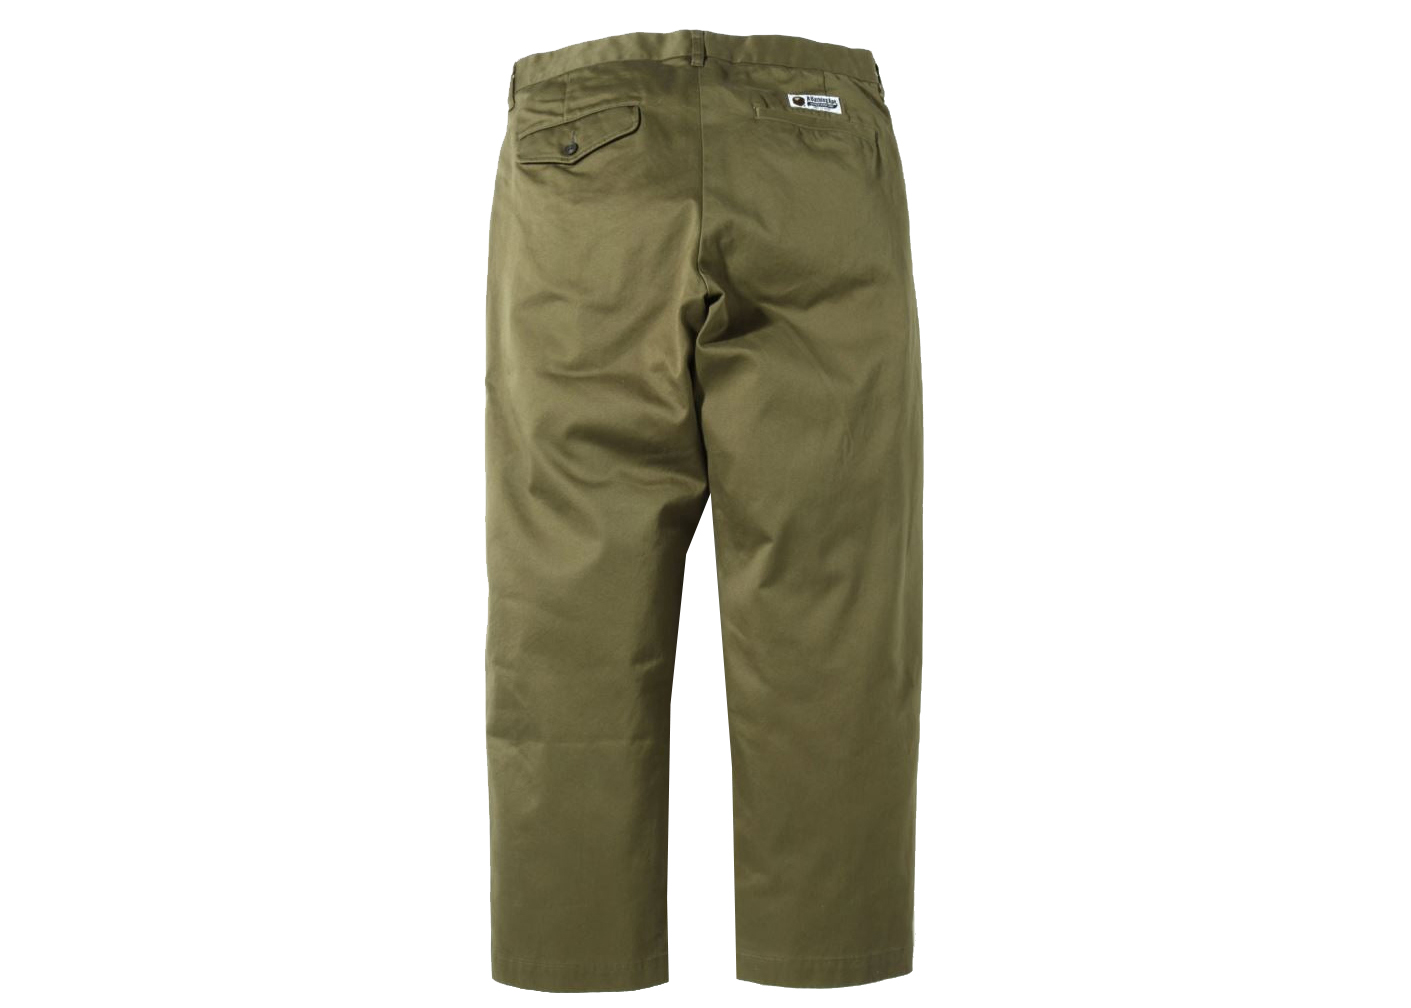 BAPE One Point Loose Fit Chino Pants Olivedrab